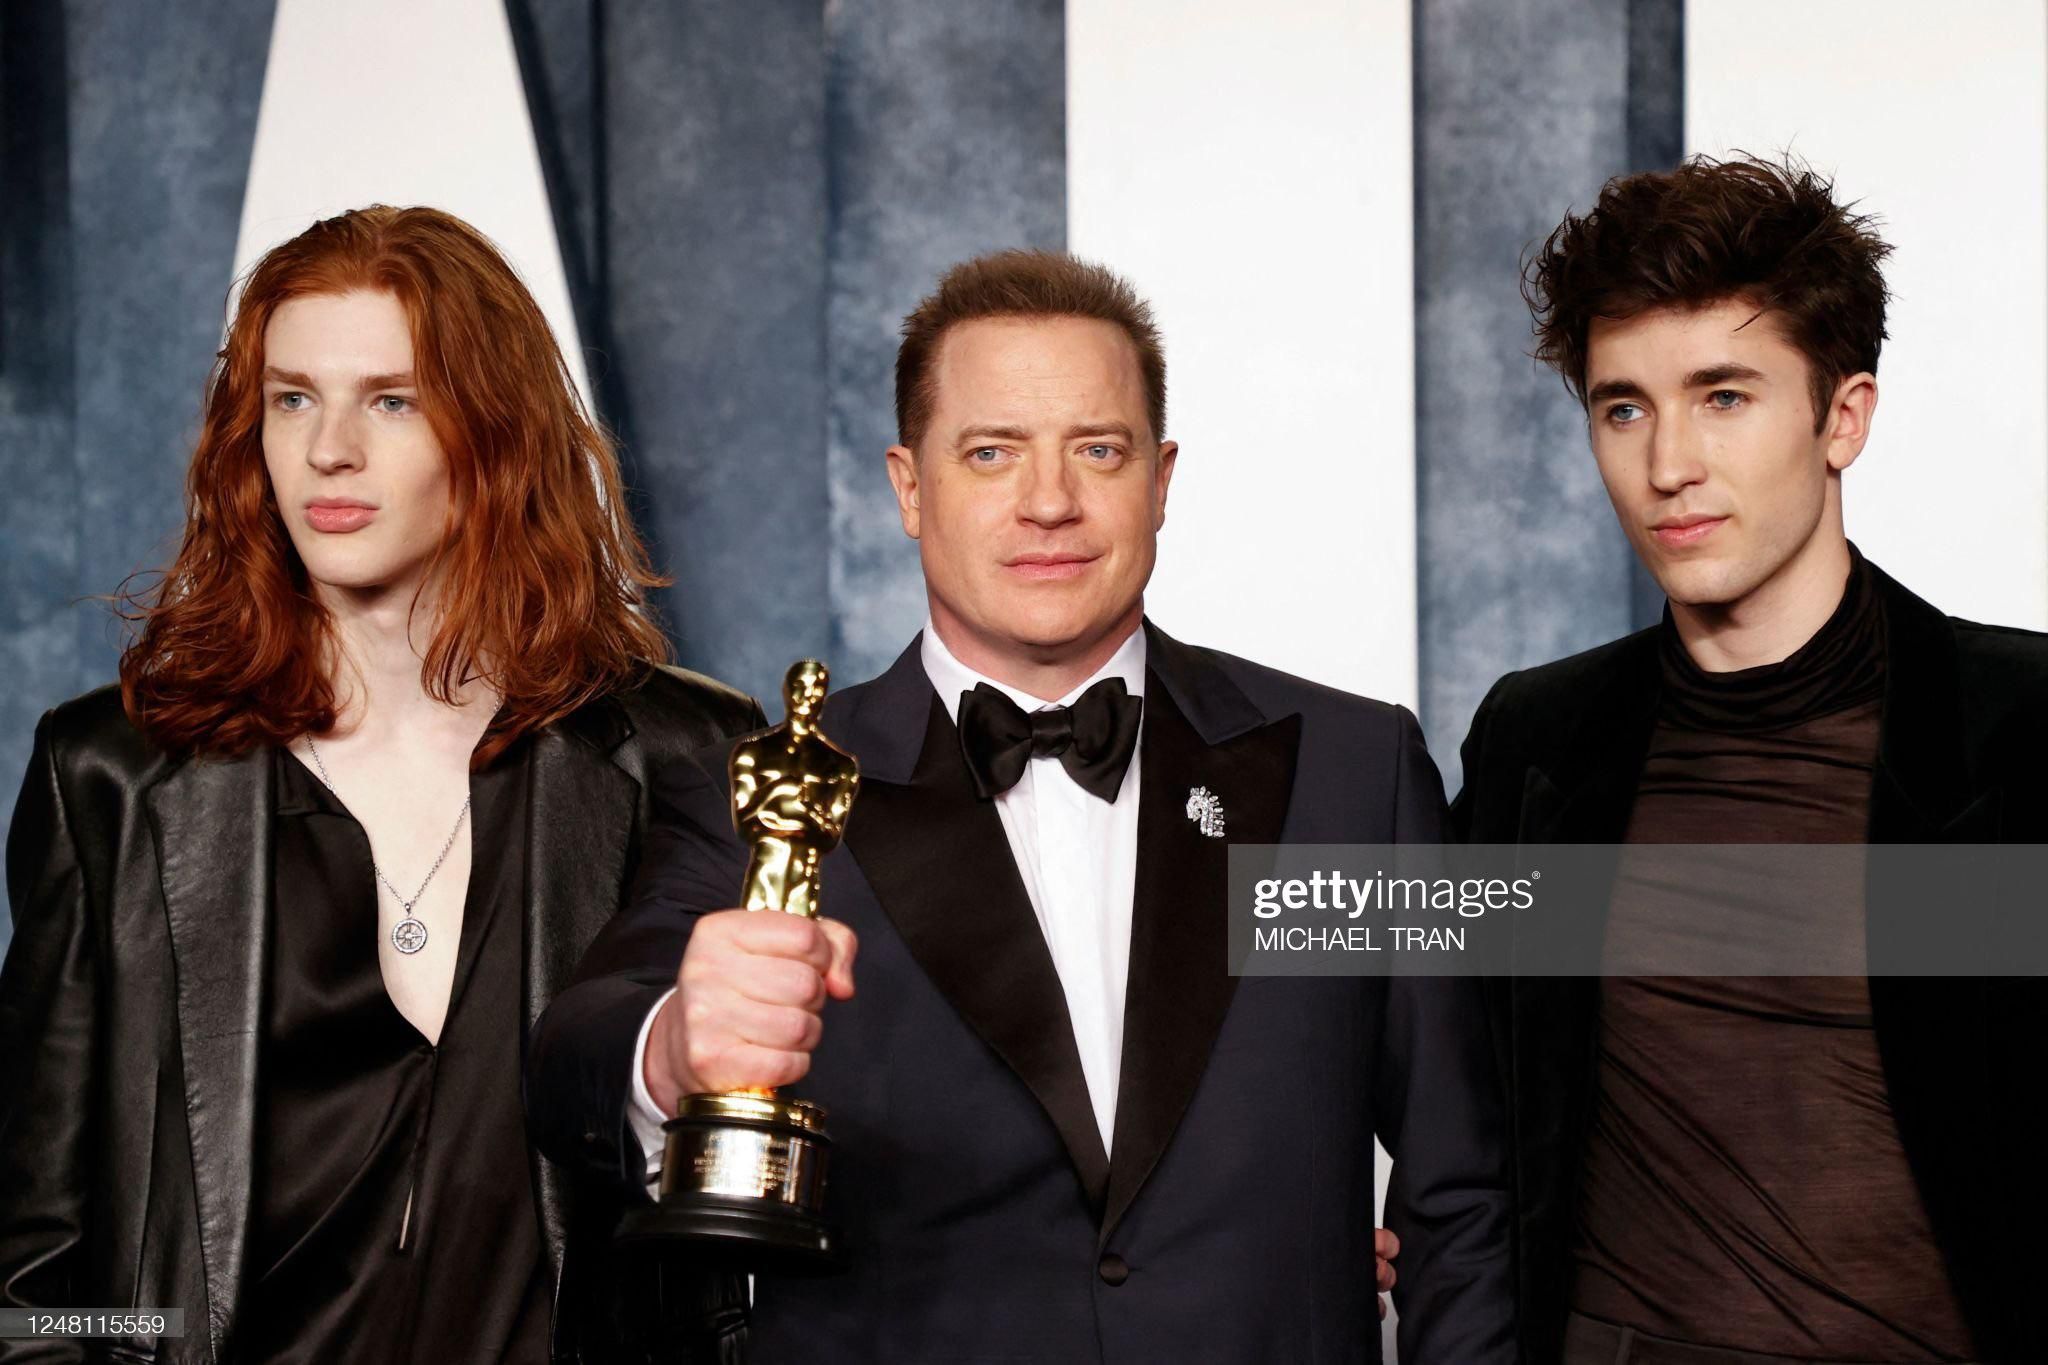 Brendan Fraser and sons...or, secret king of a vampire dynasty moonlighting as an actor?